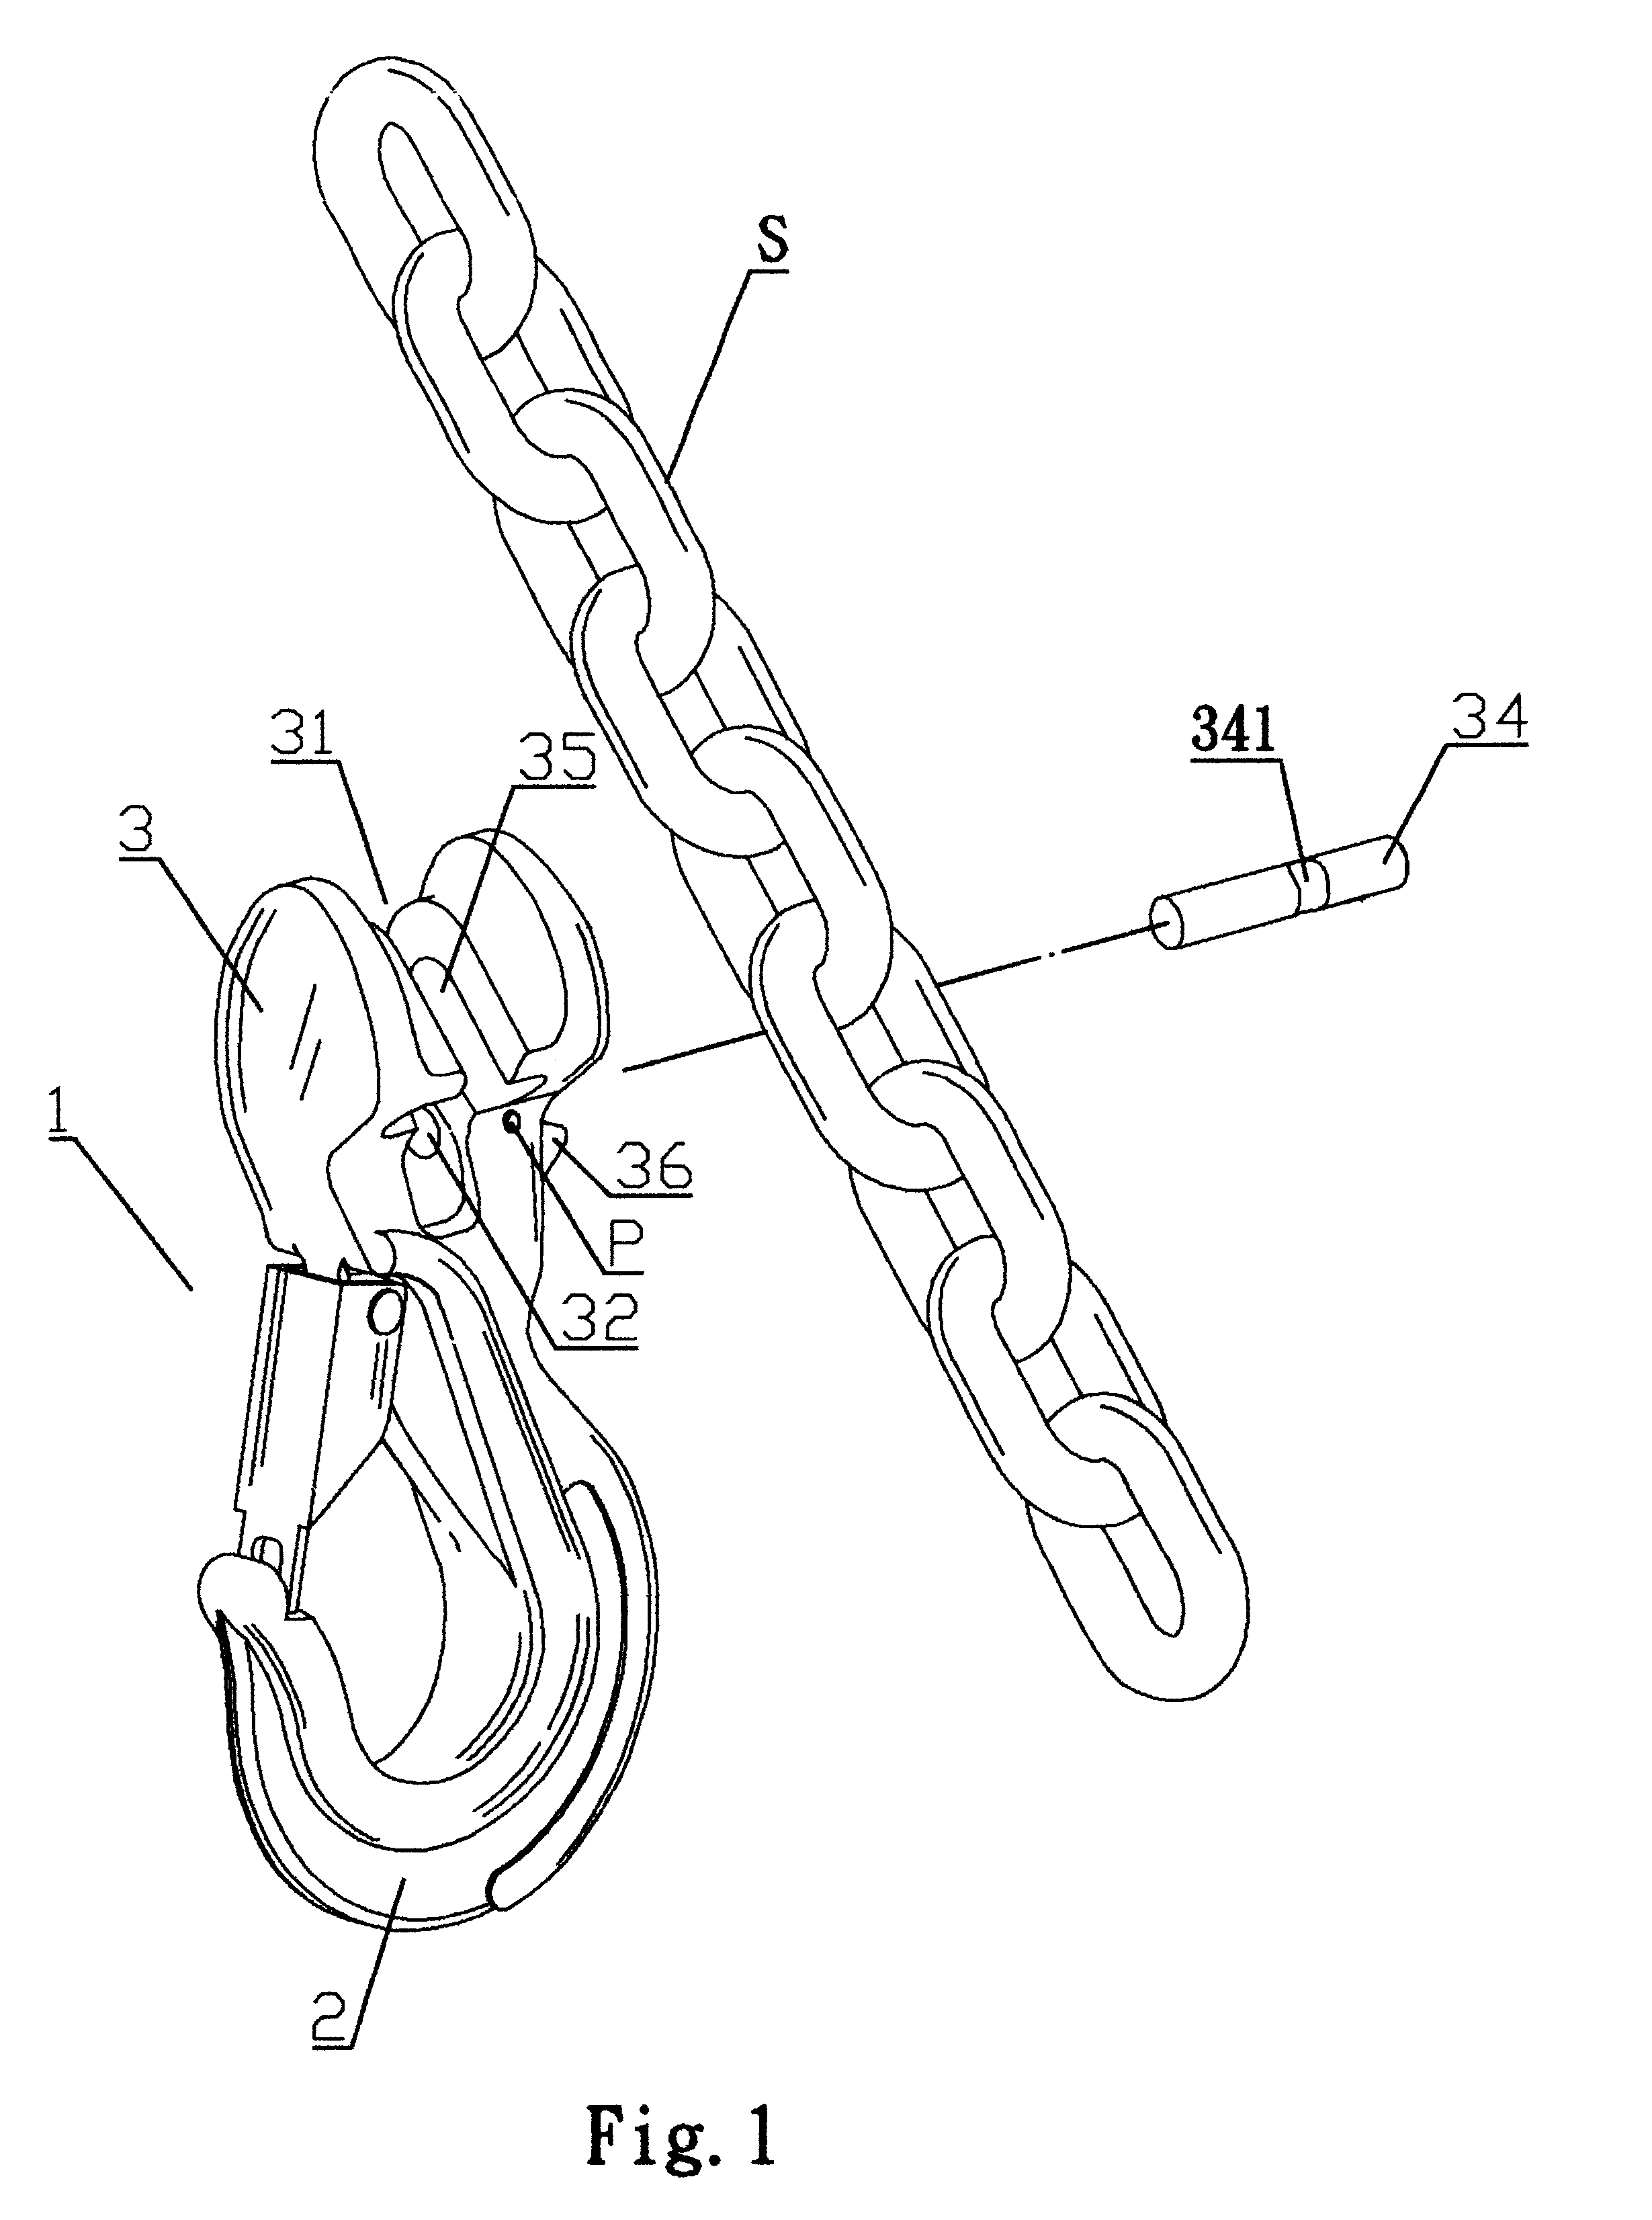 Hook capable of hooking chain at desired length